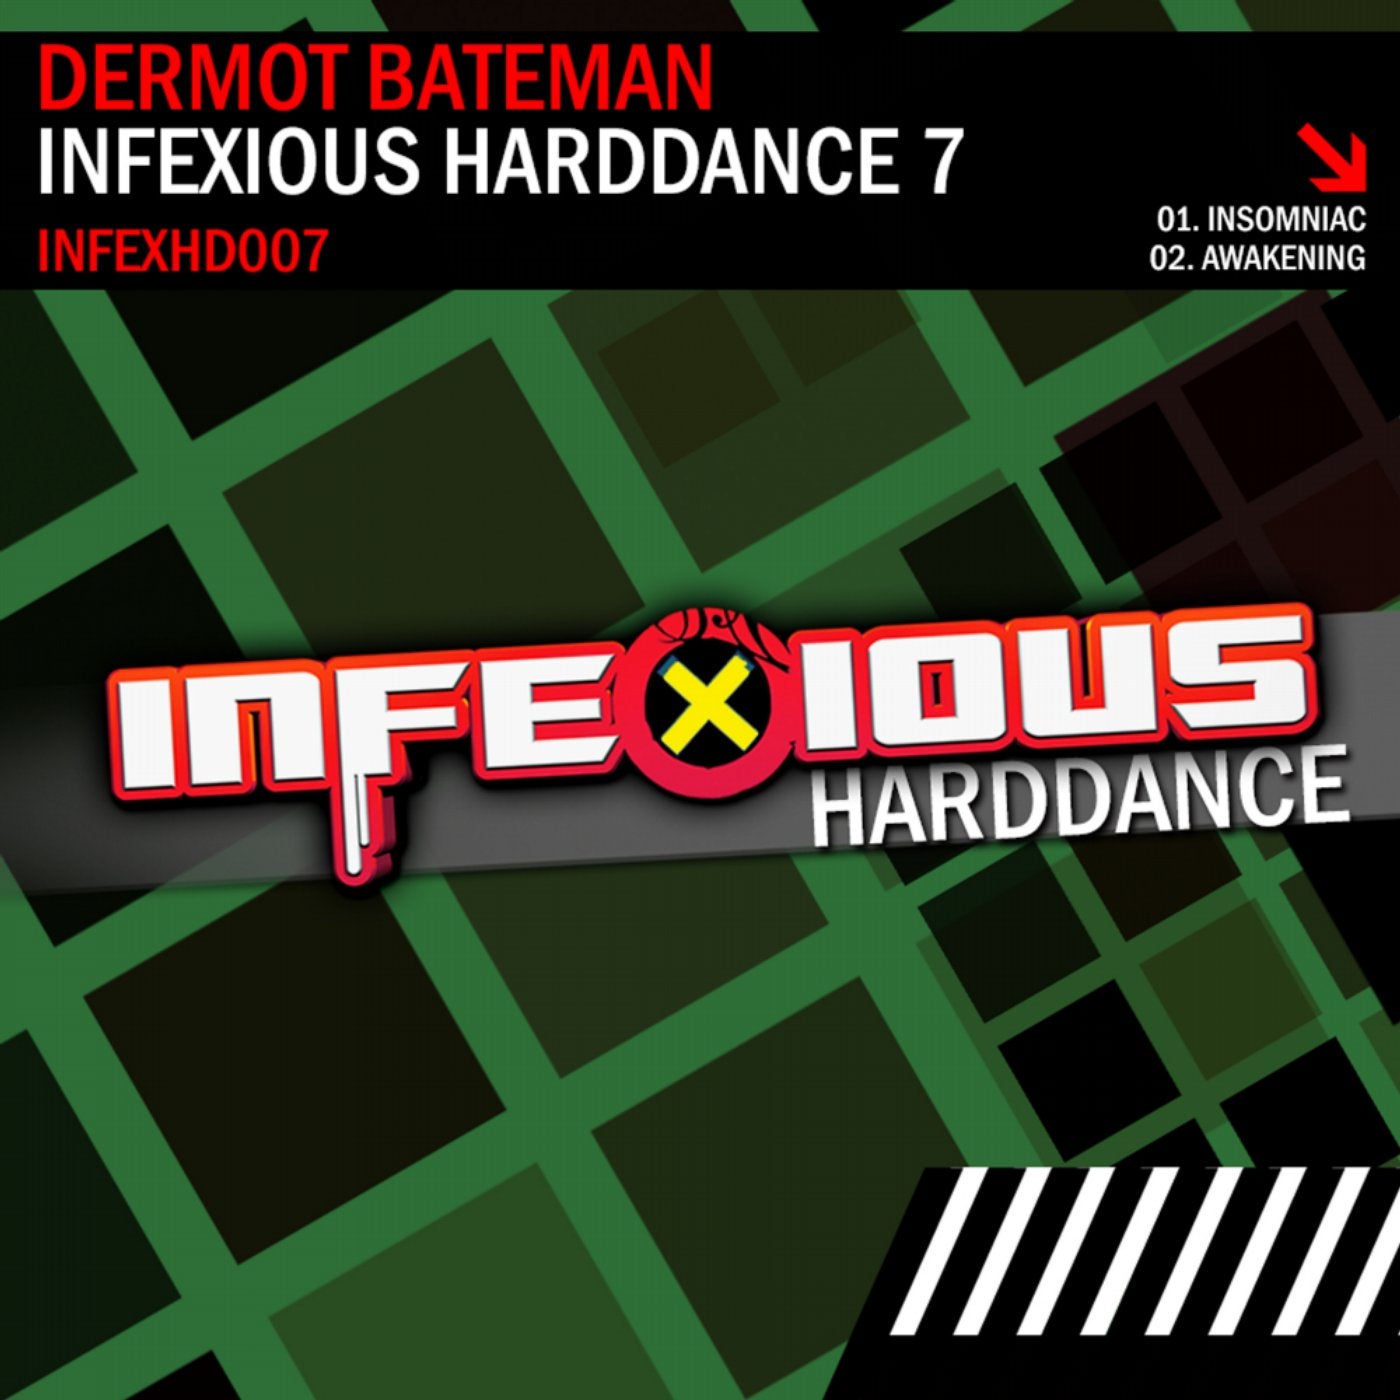 Infexious Harddance 7